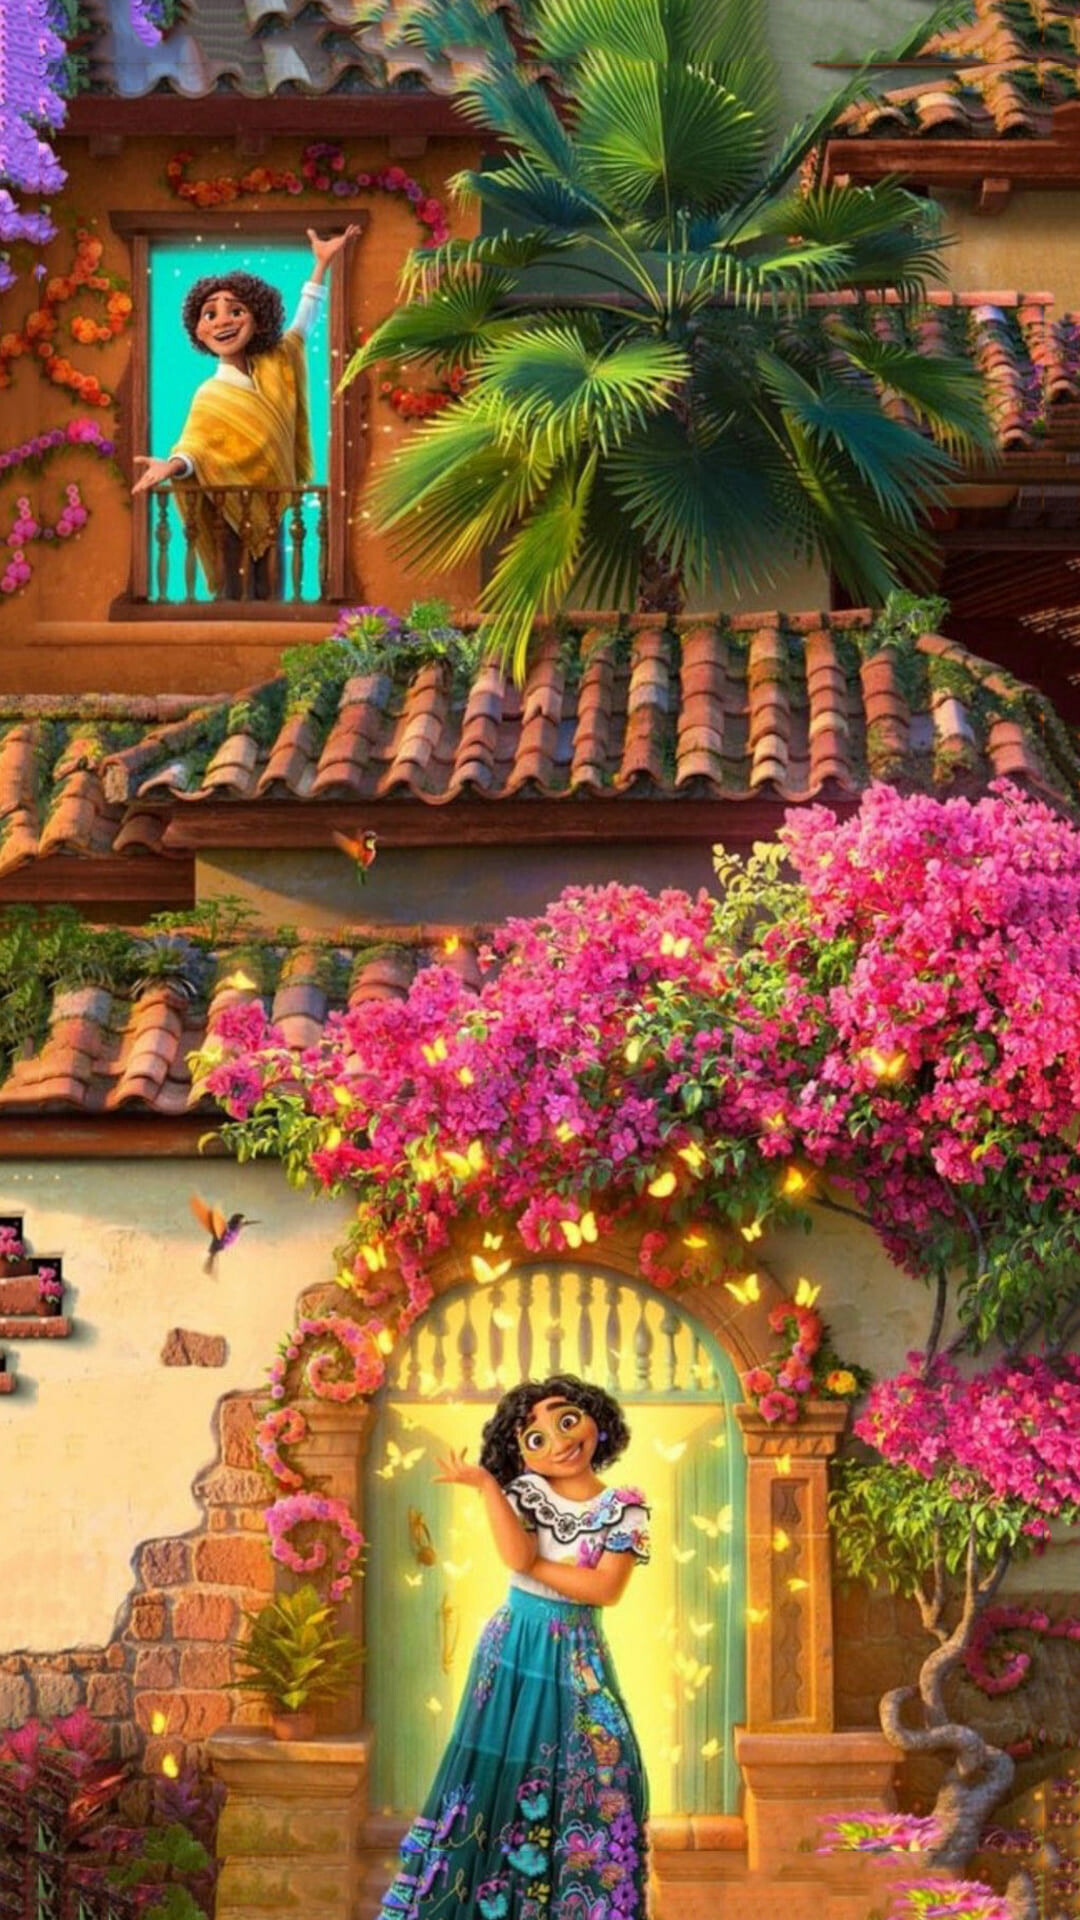 Encanto: The Academy Award nominee for Best Animated Feature Film. 1080x1920 Full HD Background.